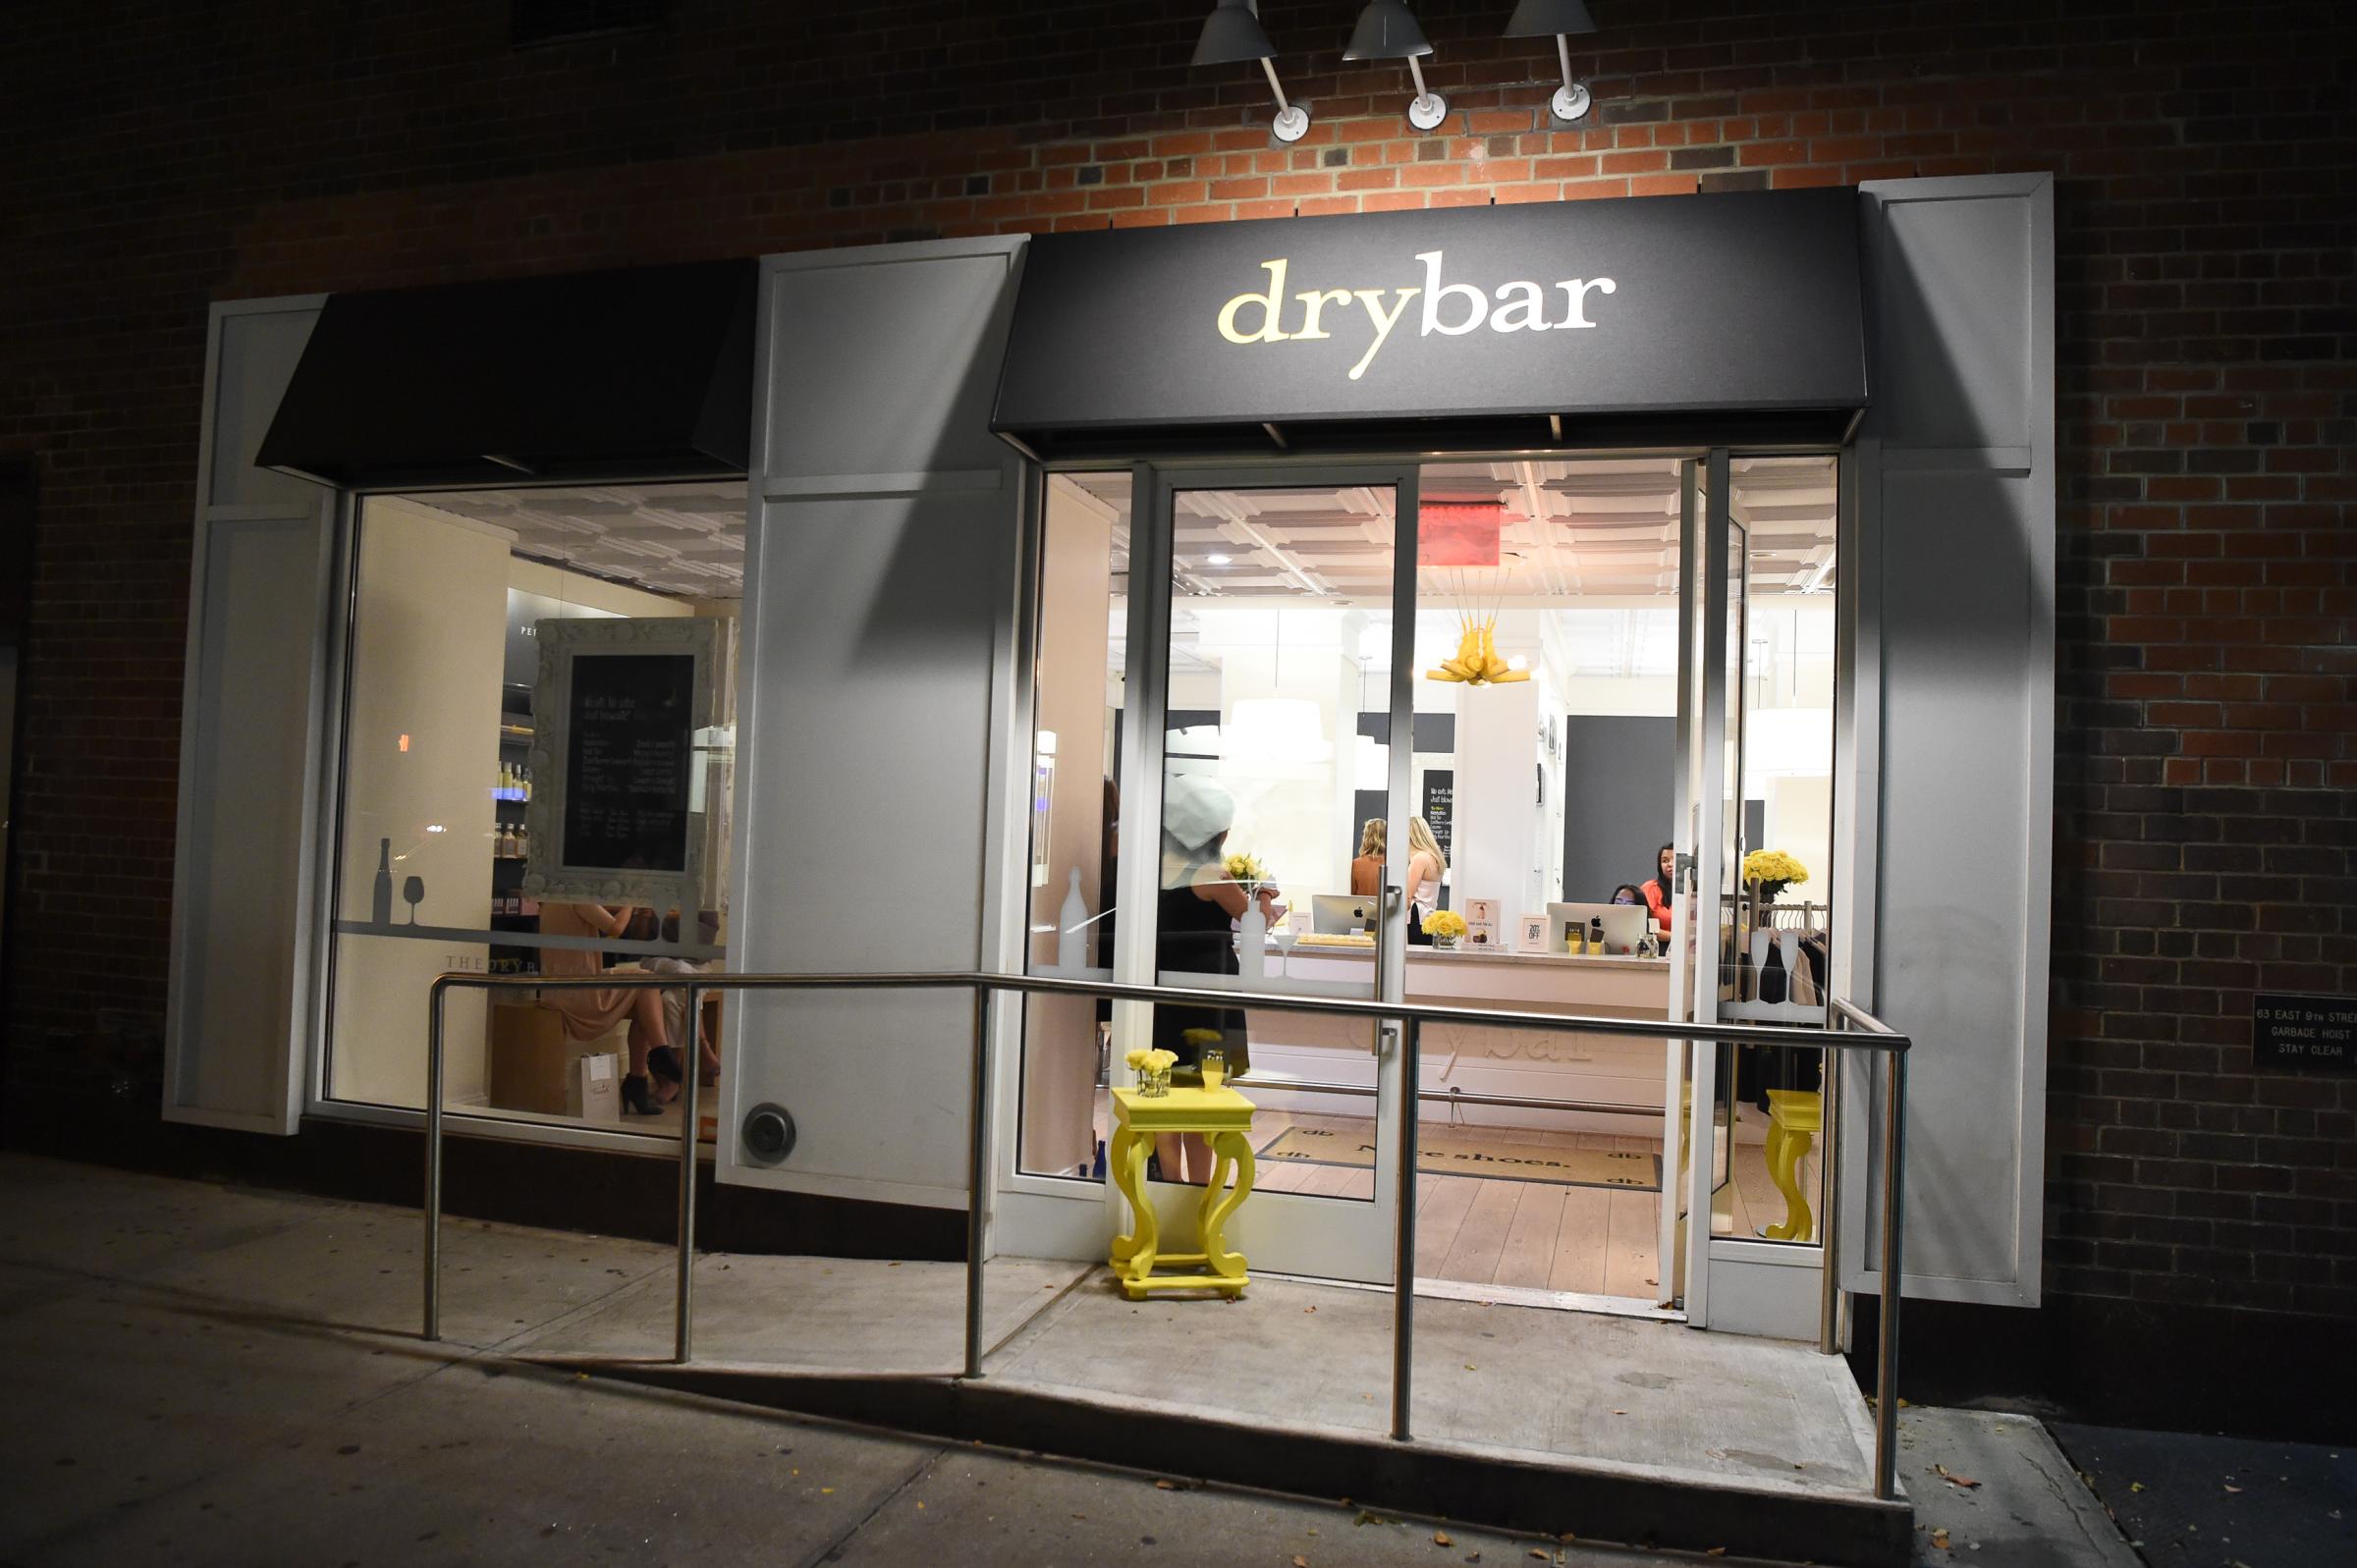 The New York launch of Alli Webb's book "The Drybar Guide To Good Hair For All" at Drybar Greenwich Village